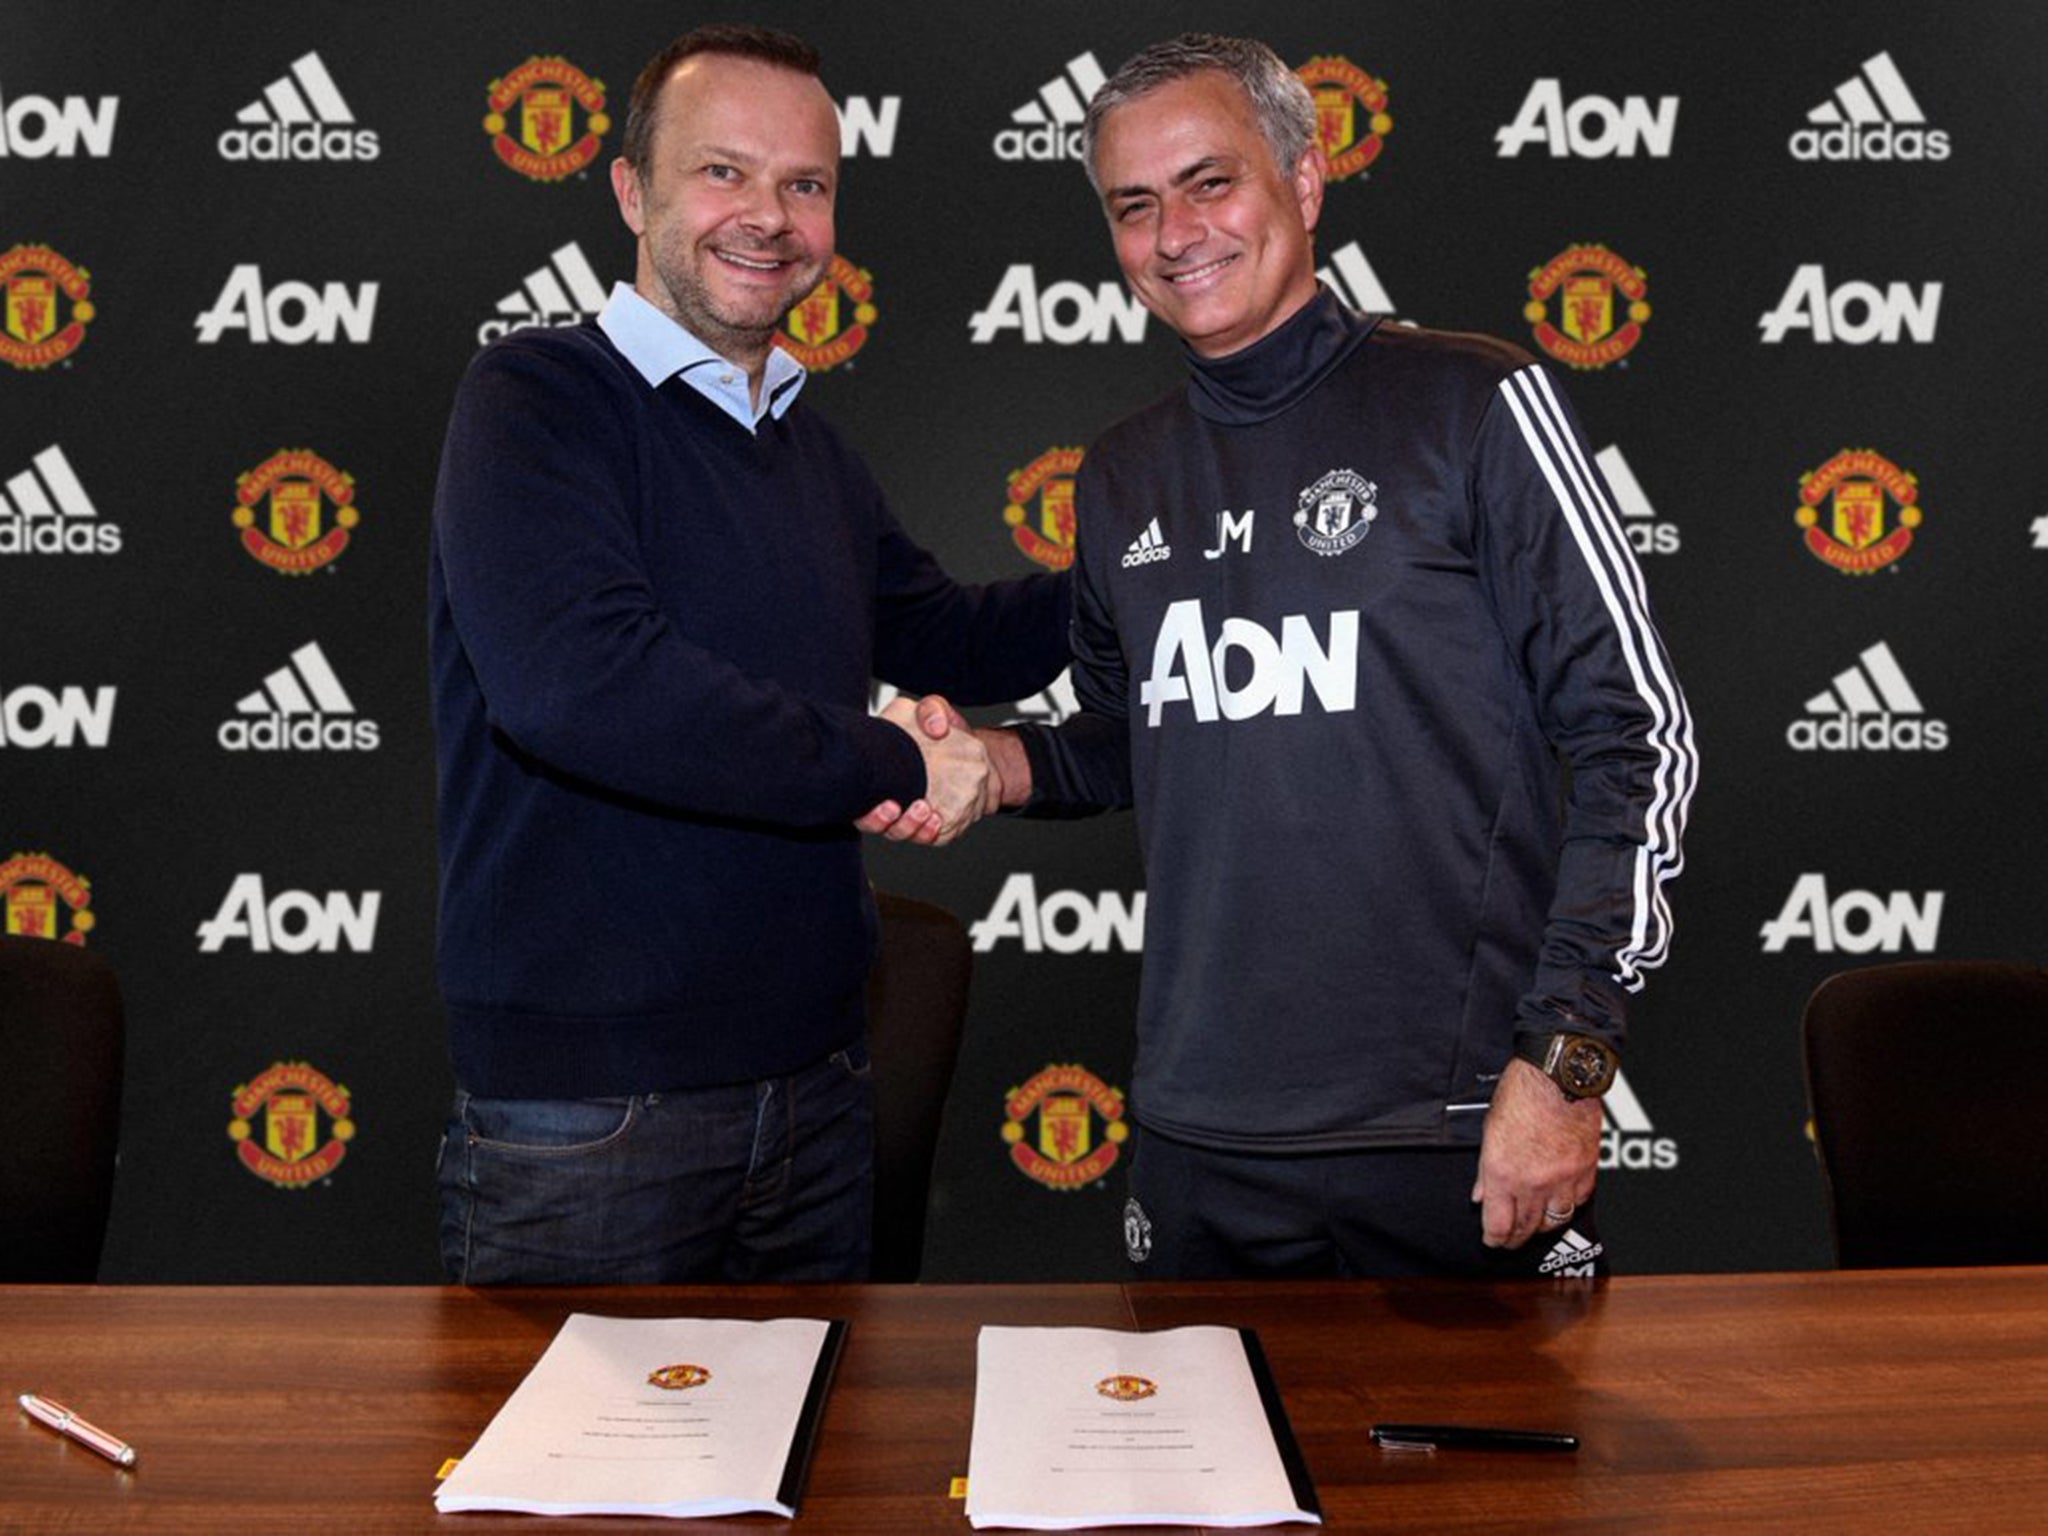 Manchester United executive vice-chairman Ed Woodward with Jose Mourinho after announcing his new contract